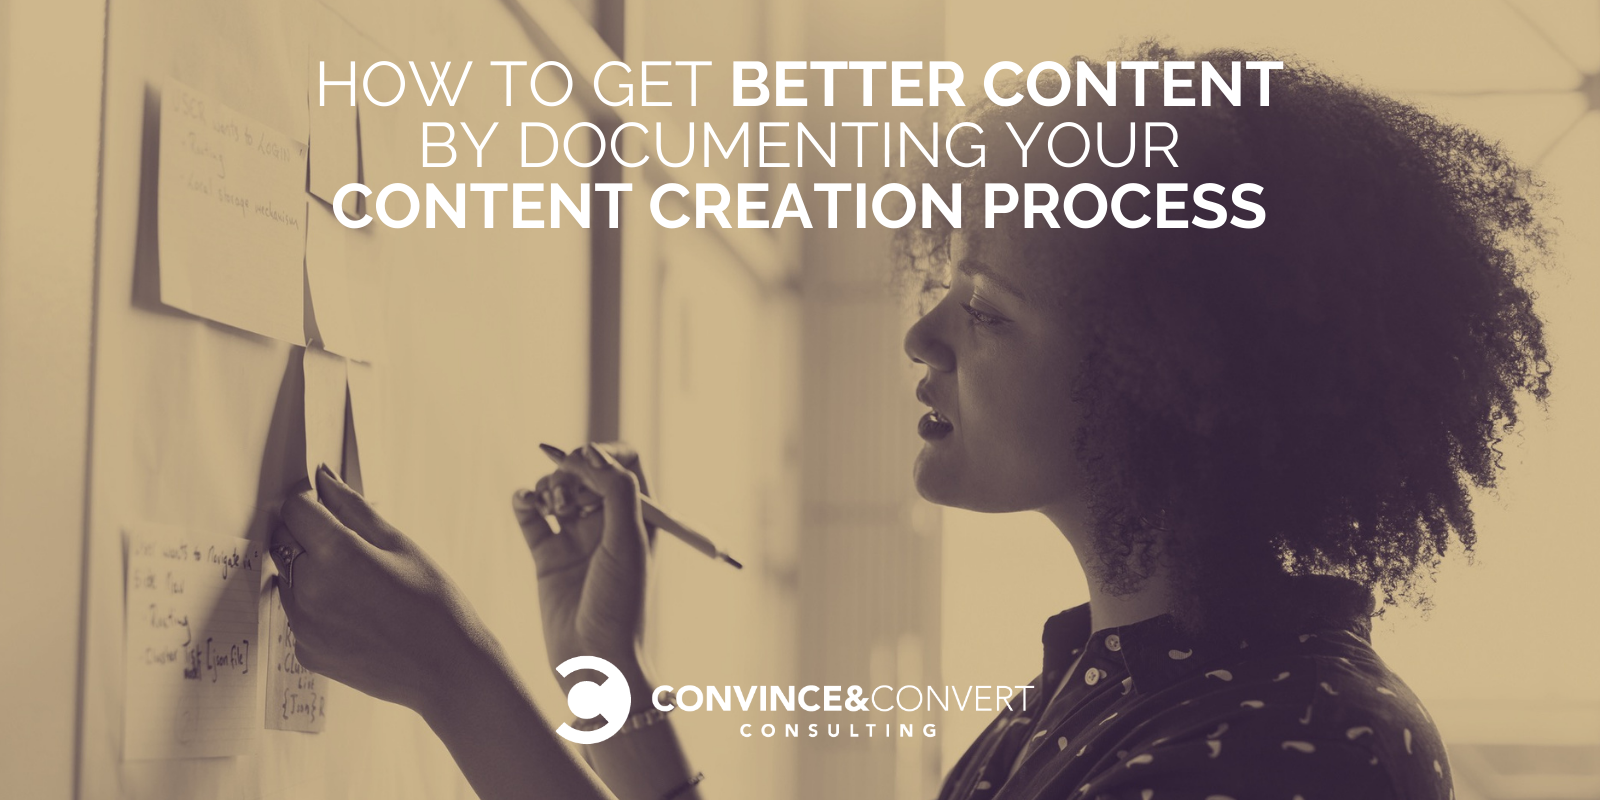 You are currently viewing How to Get Better Content by Documenting Your Content Creation Process